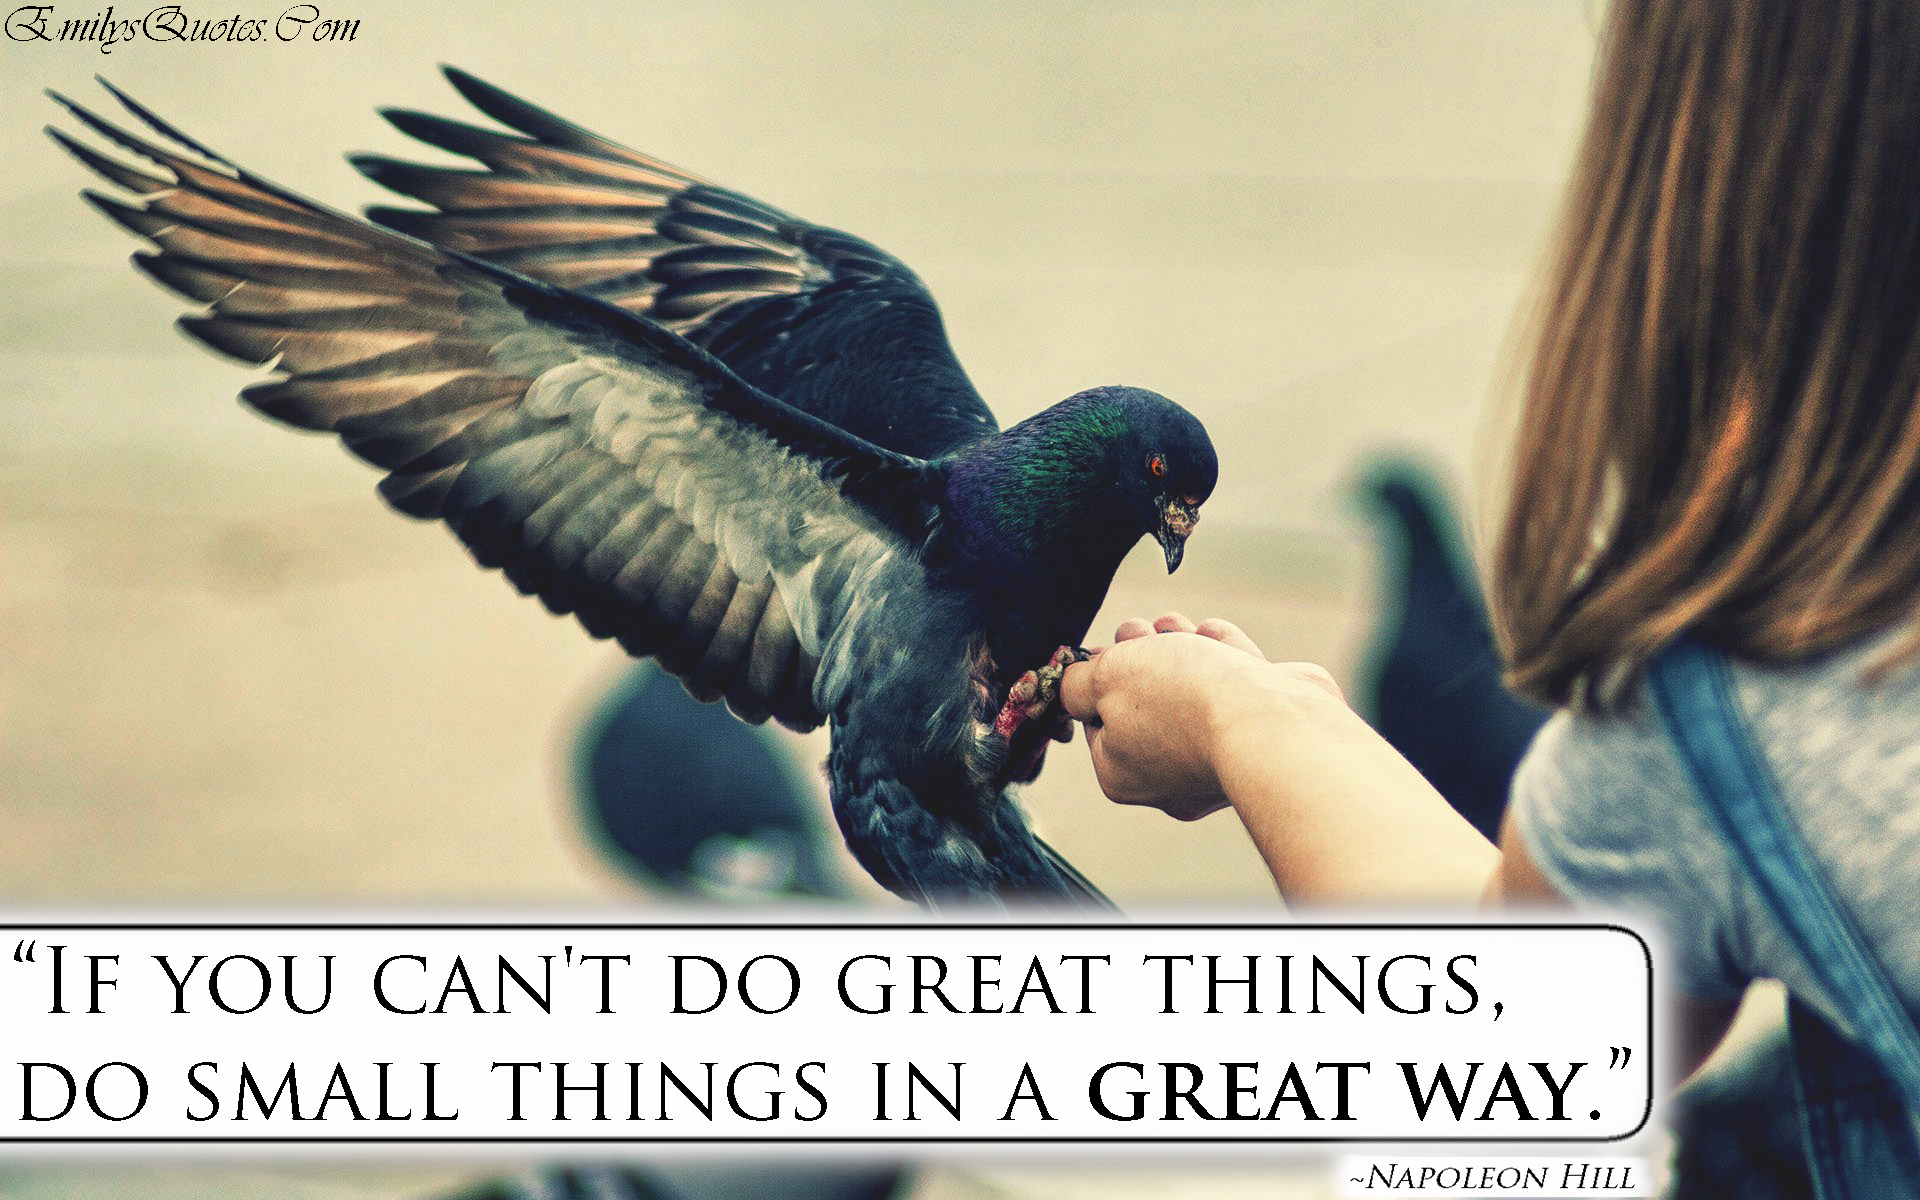 If you can’t do great things, do small things in a great way